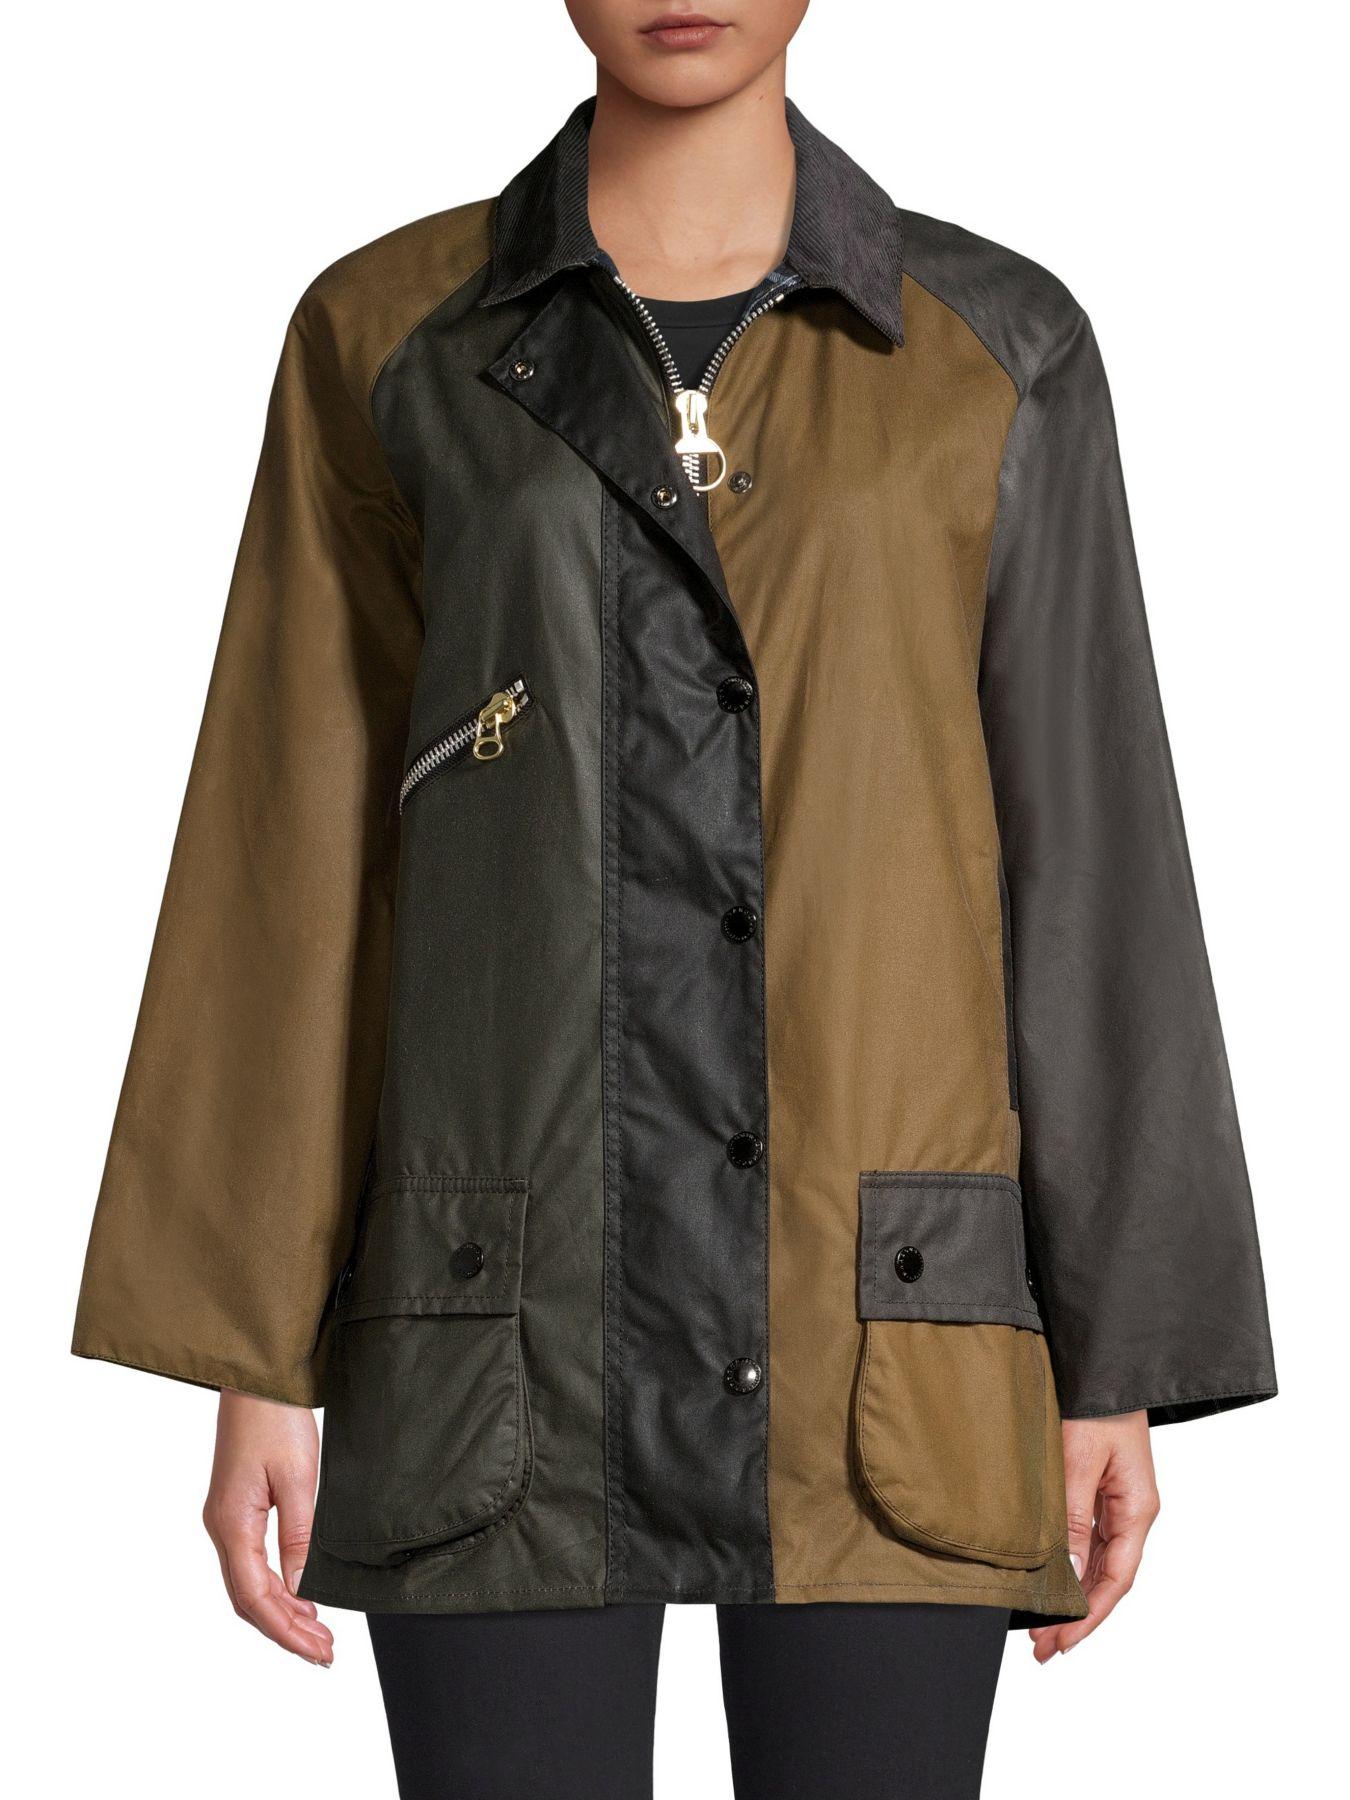 Barbour X Alexa Chung Oversized Patch Jacket | Lyst